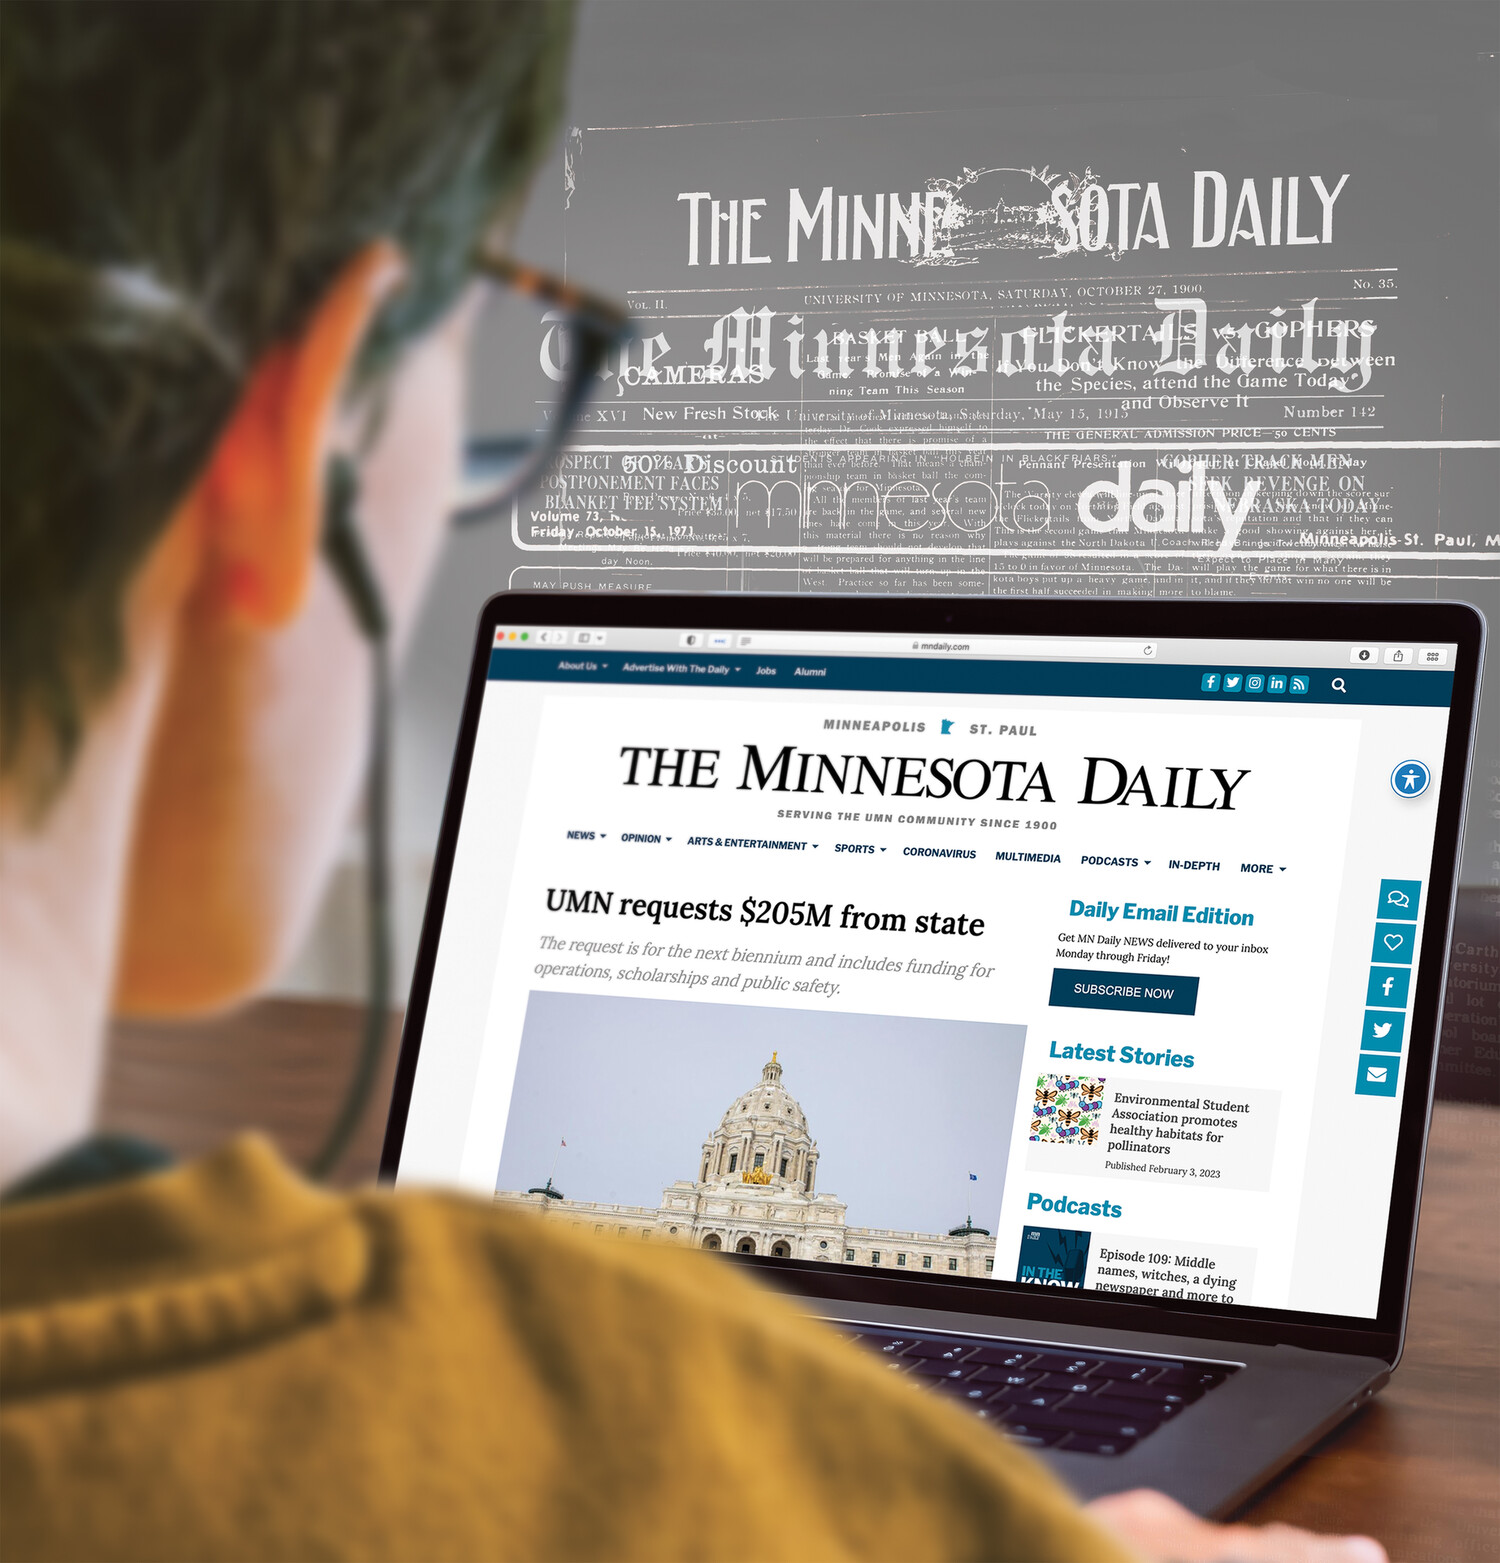 The Evolution of The Minnesota Daily